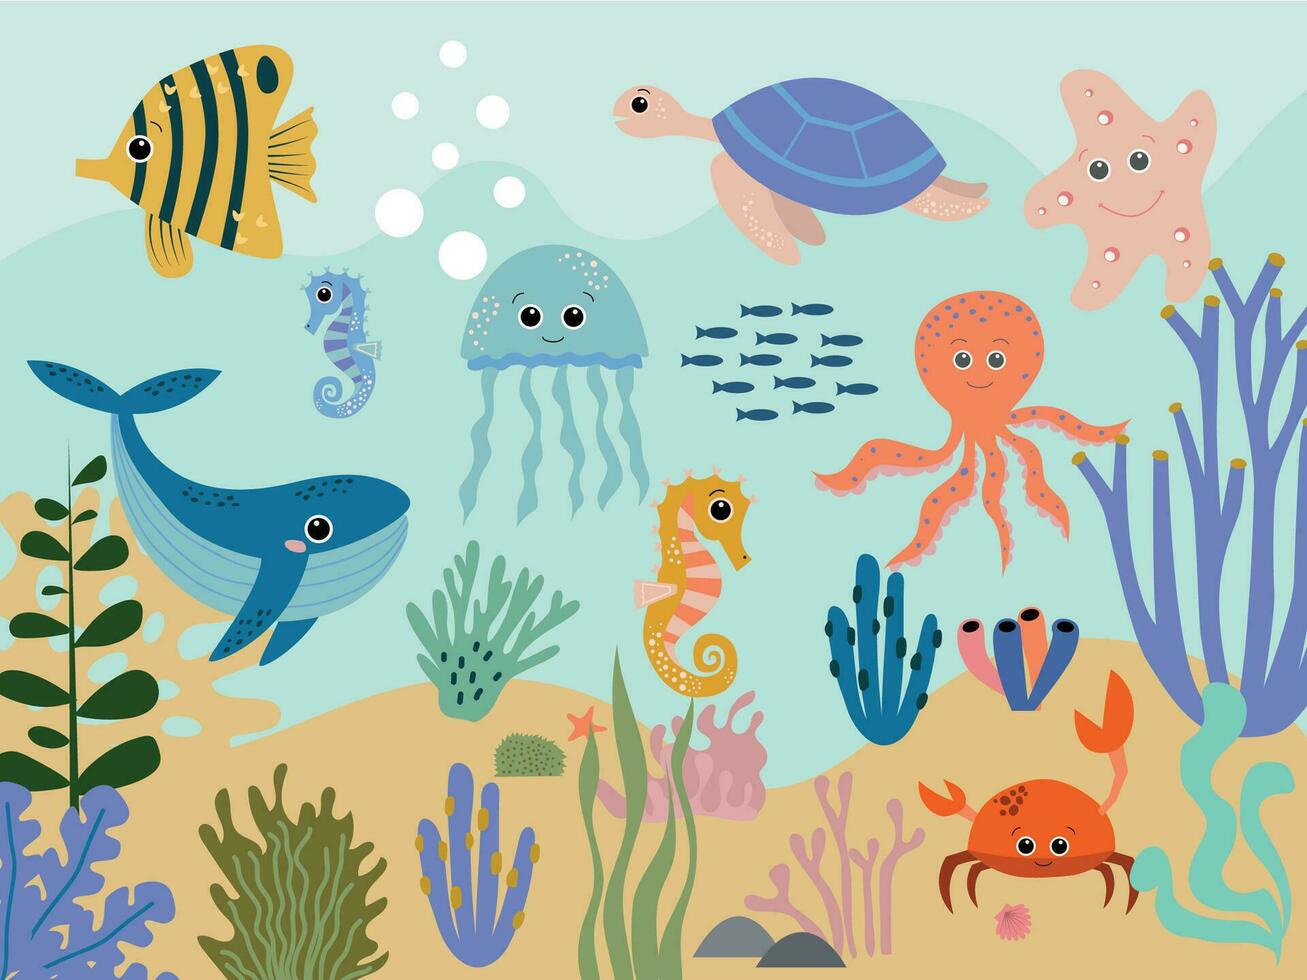 Colorful underwater world with whales and starfish swimming with an octopus amongst the seaweed and rocks, vector cartoon illustration. Vector illustration